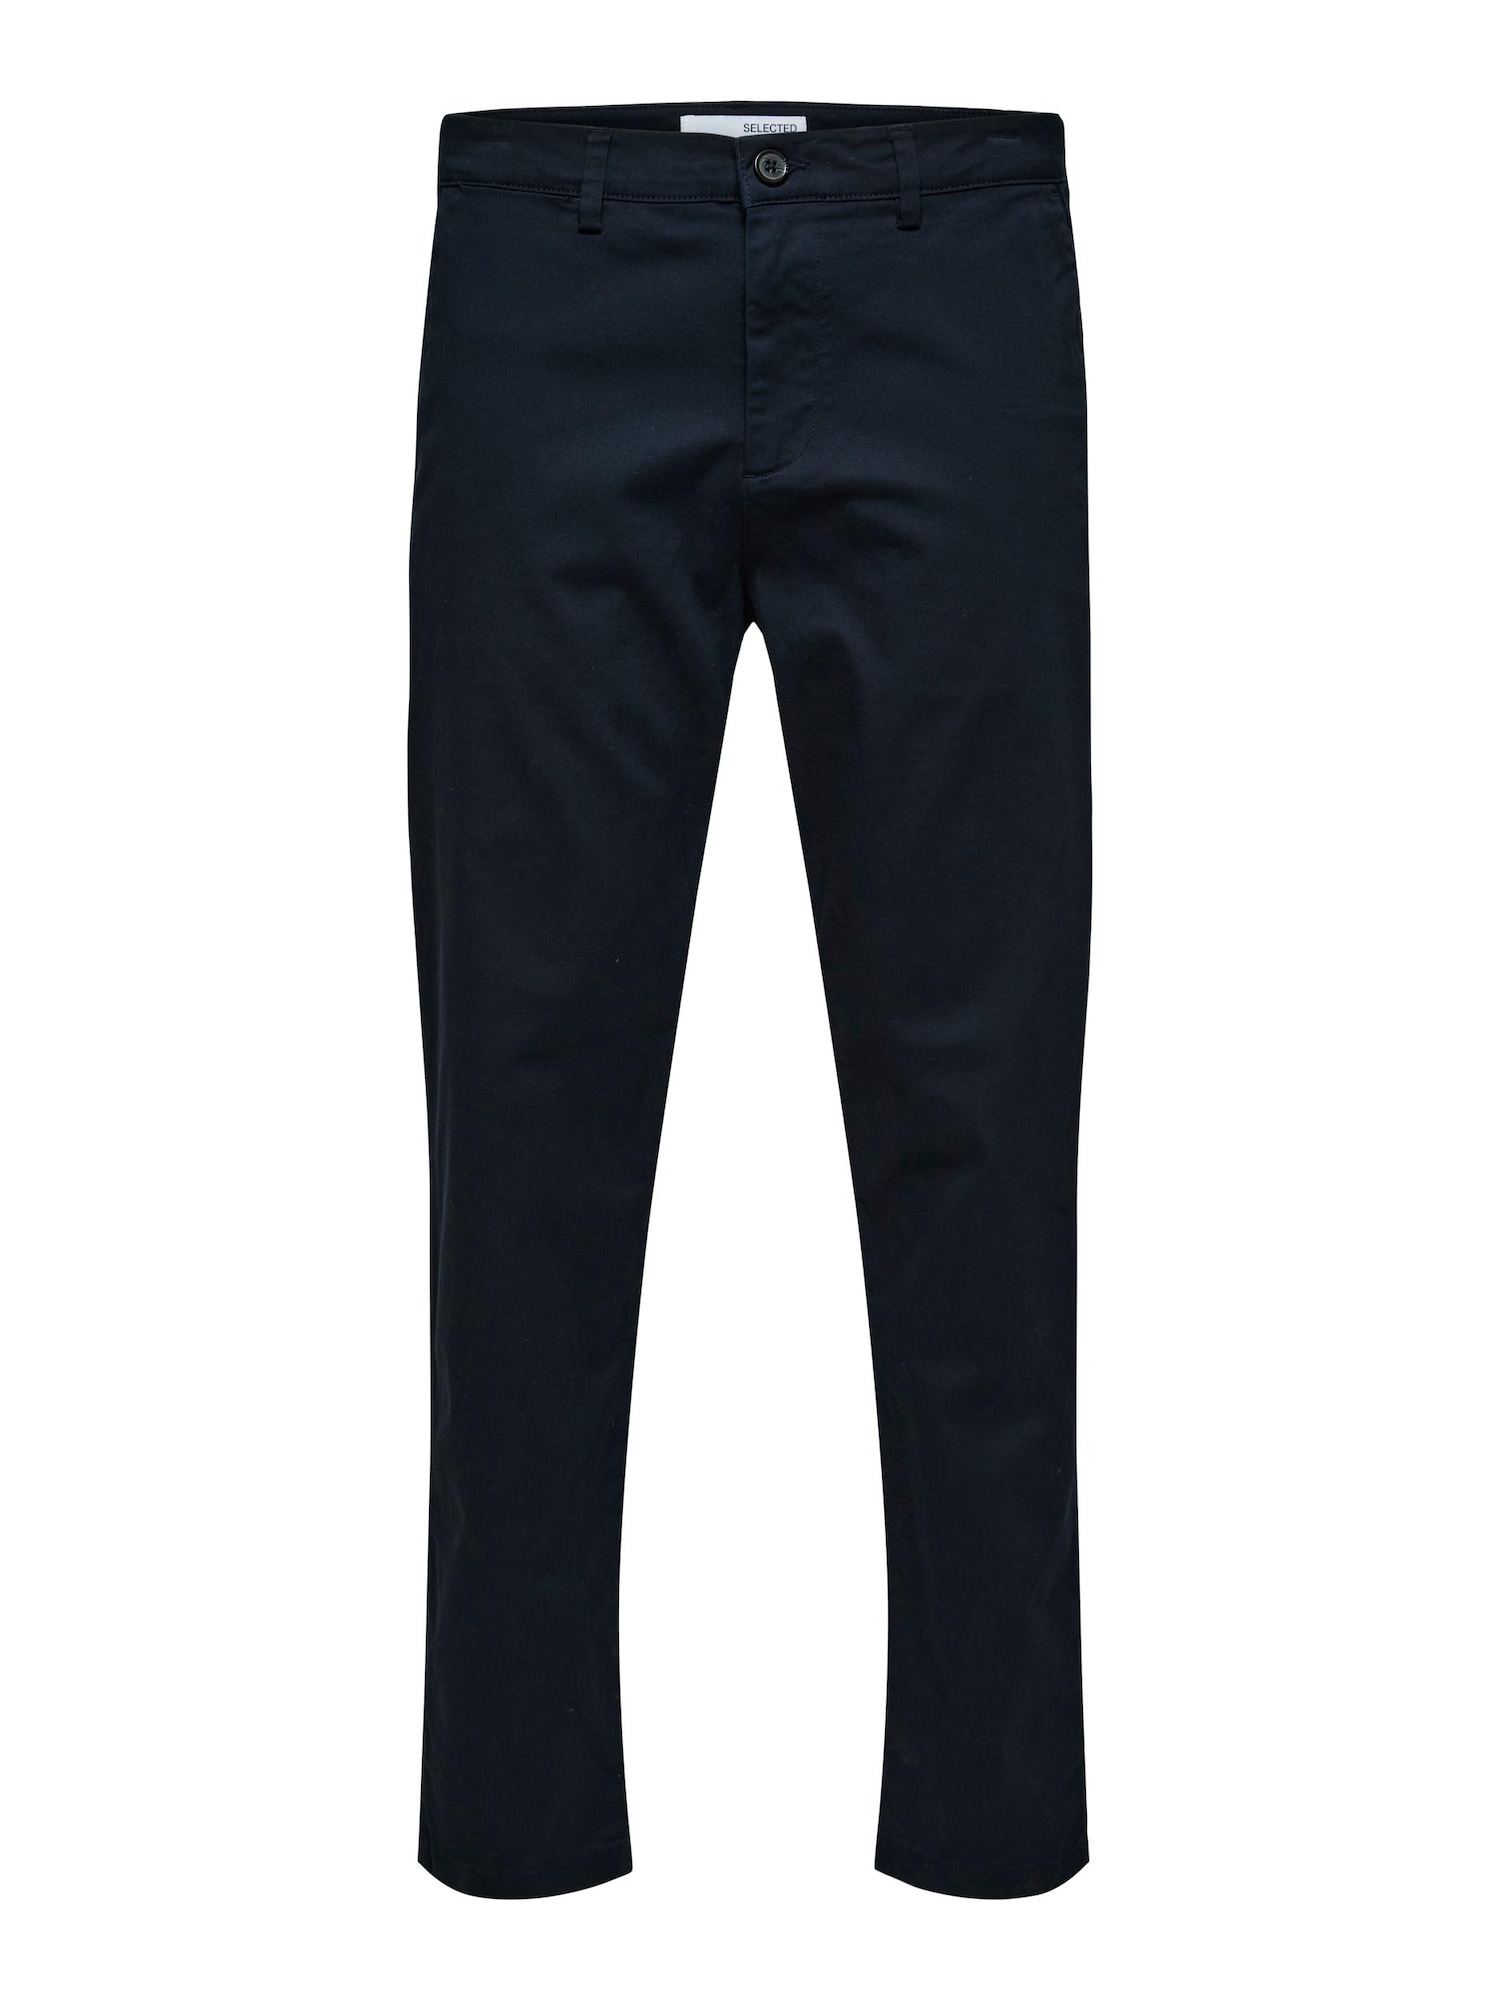 SELECTED HOMME Chino hlače  temno modra